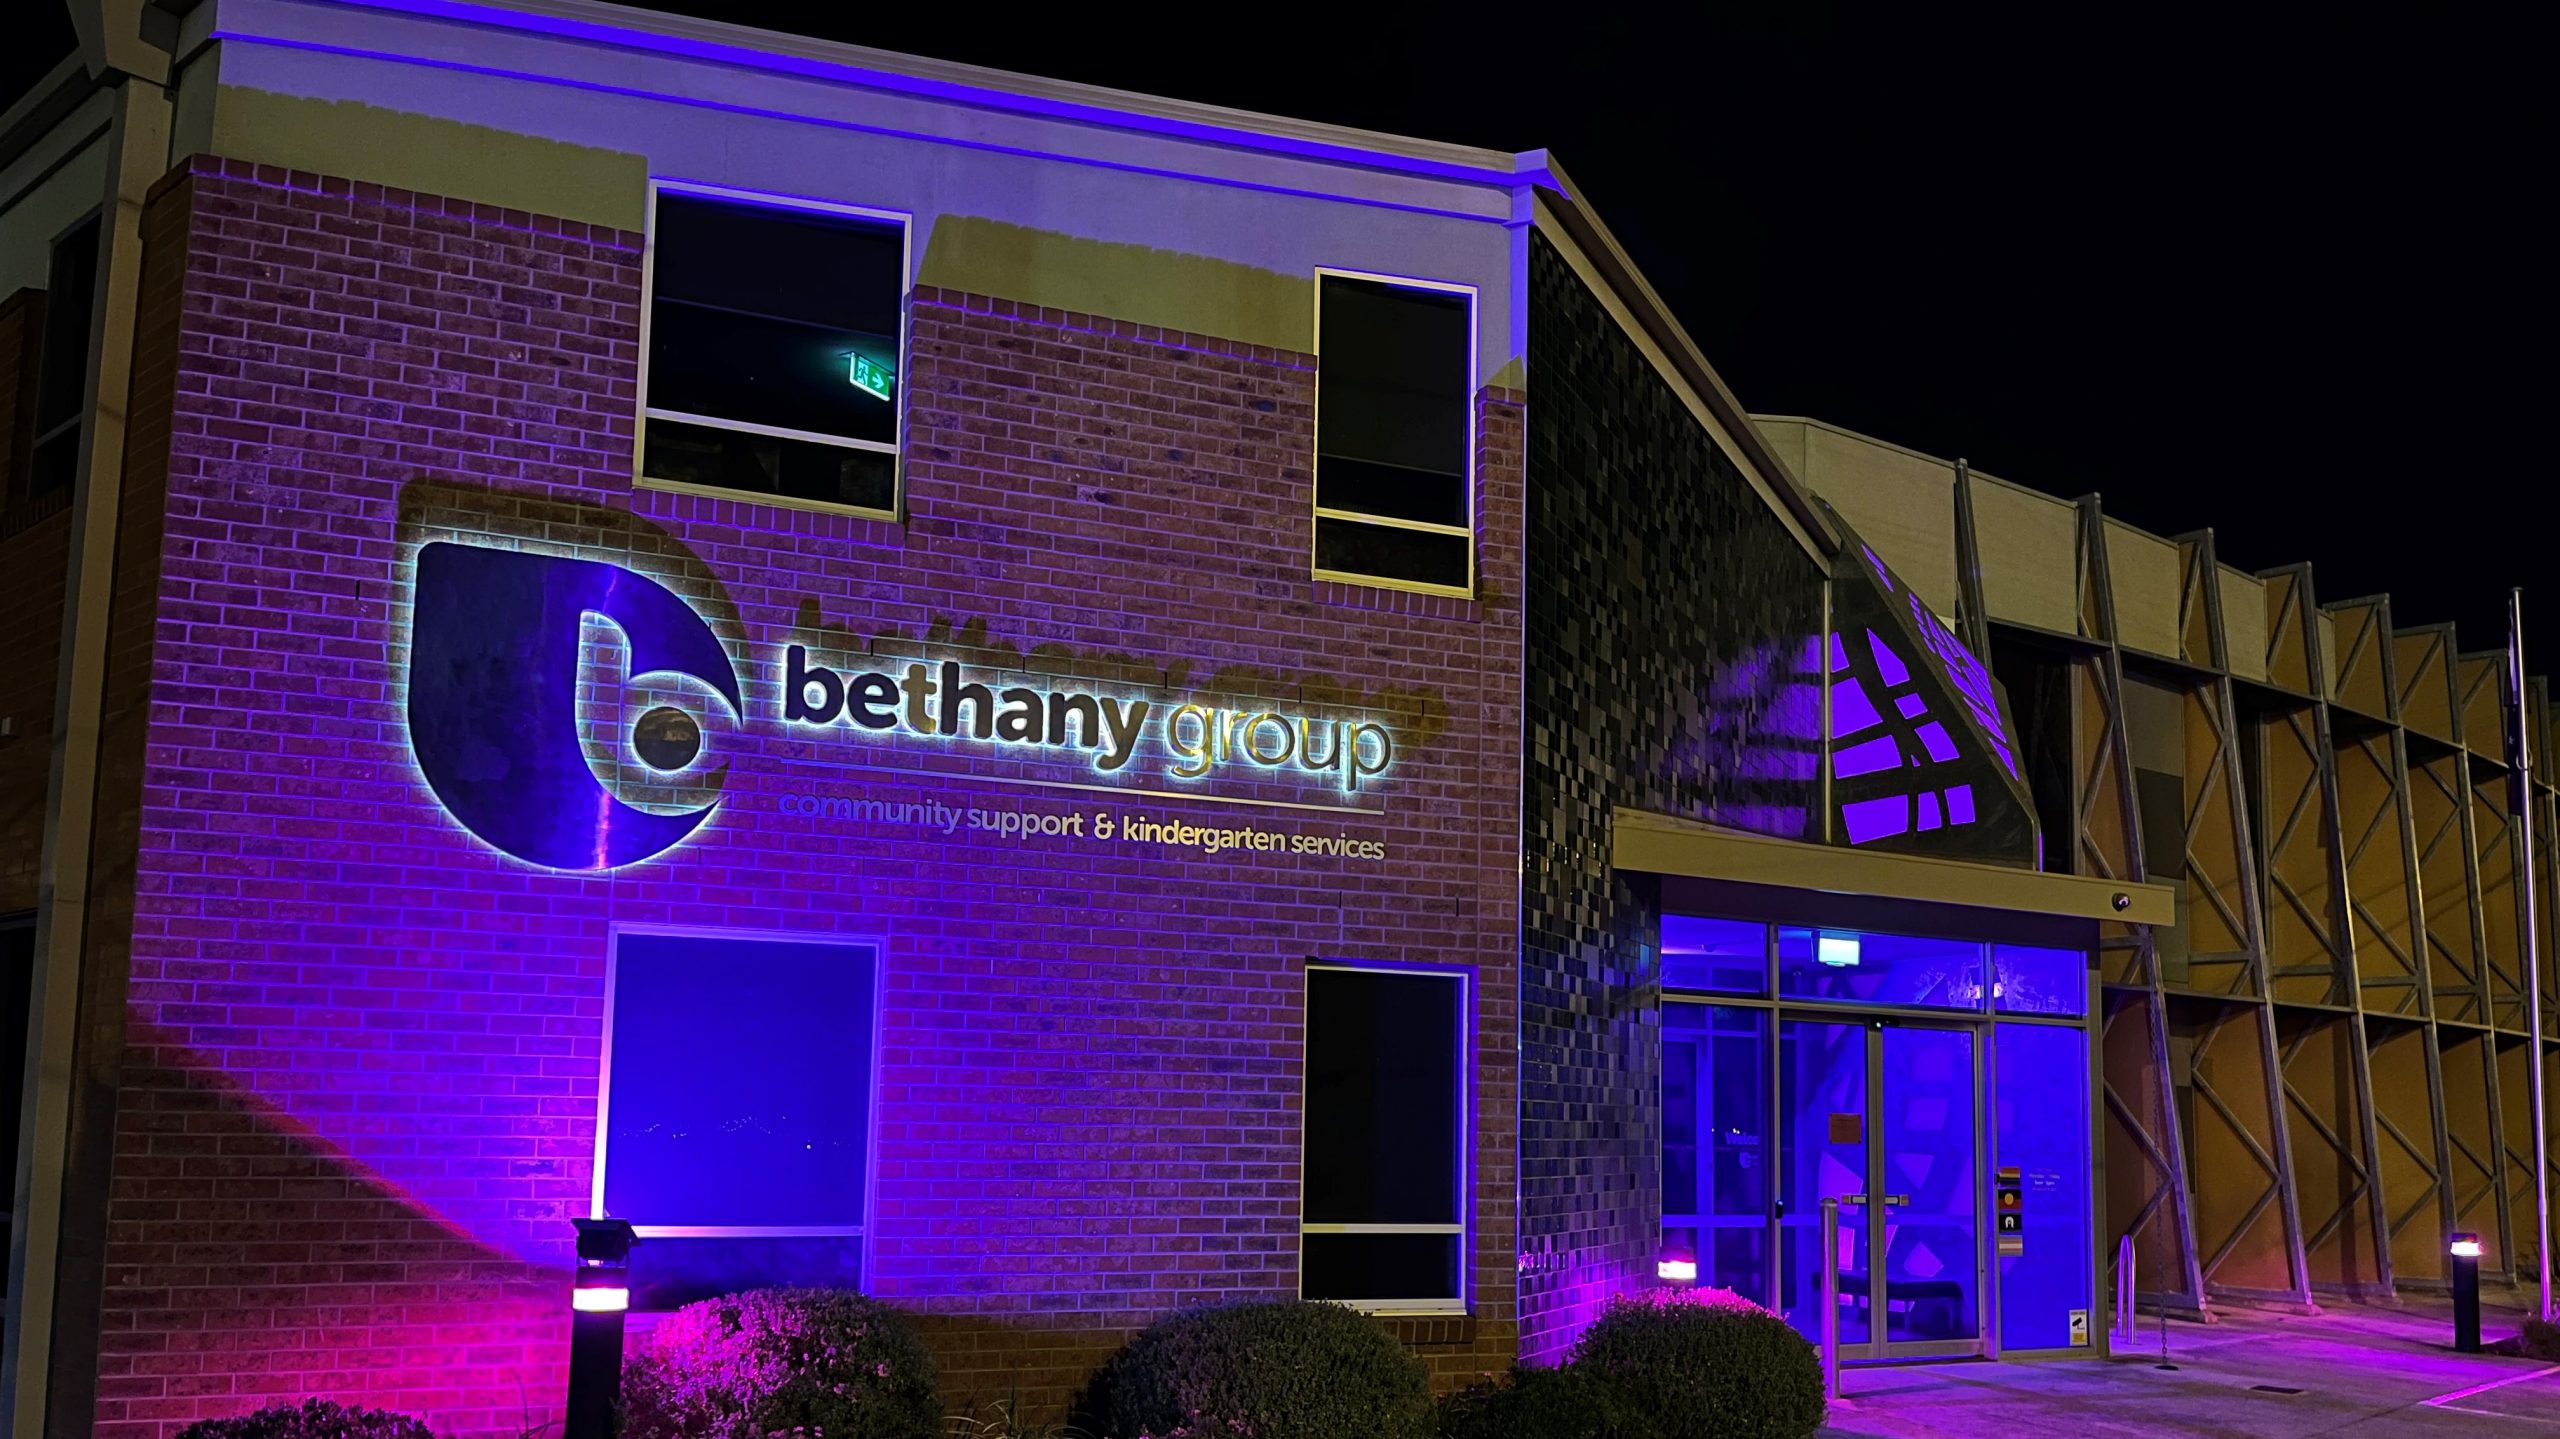 Photo of a two storey office building, lit up with purple lights, with the signage Bethany 